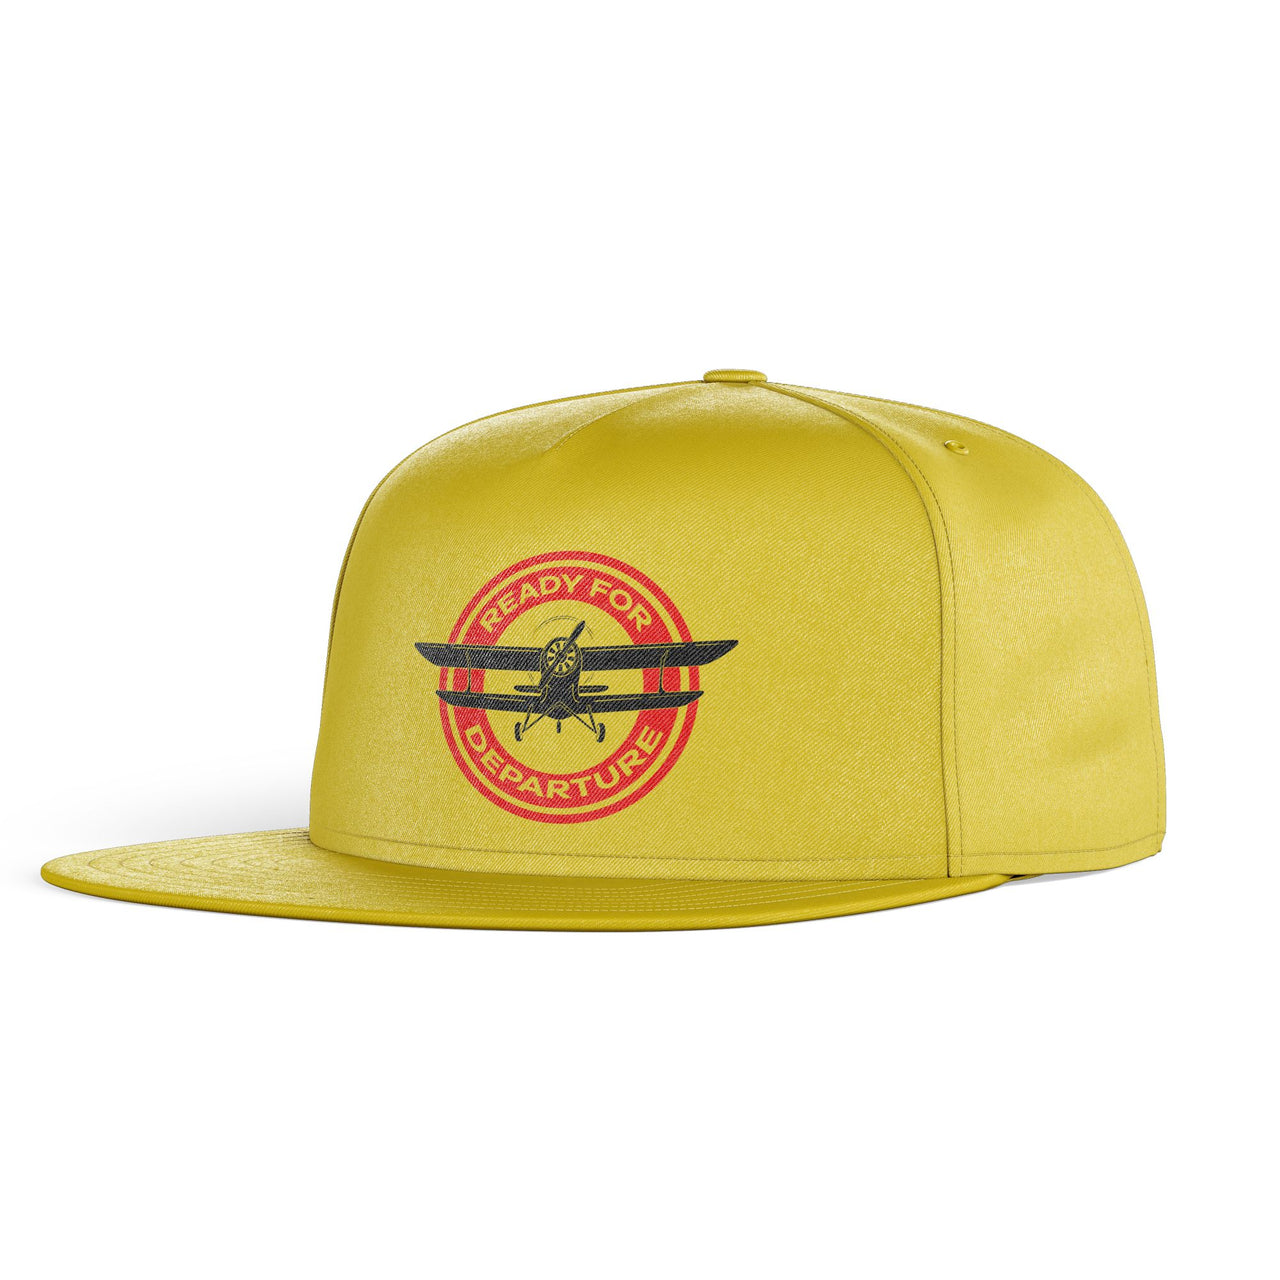 Ready for Departure Designed Snapback Caps & Hats